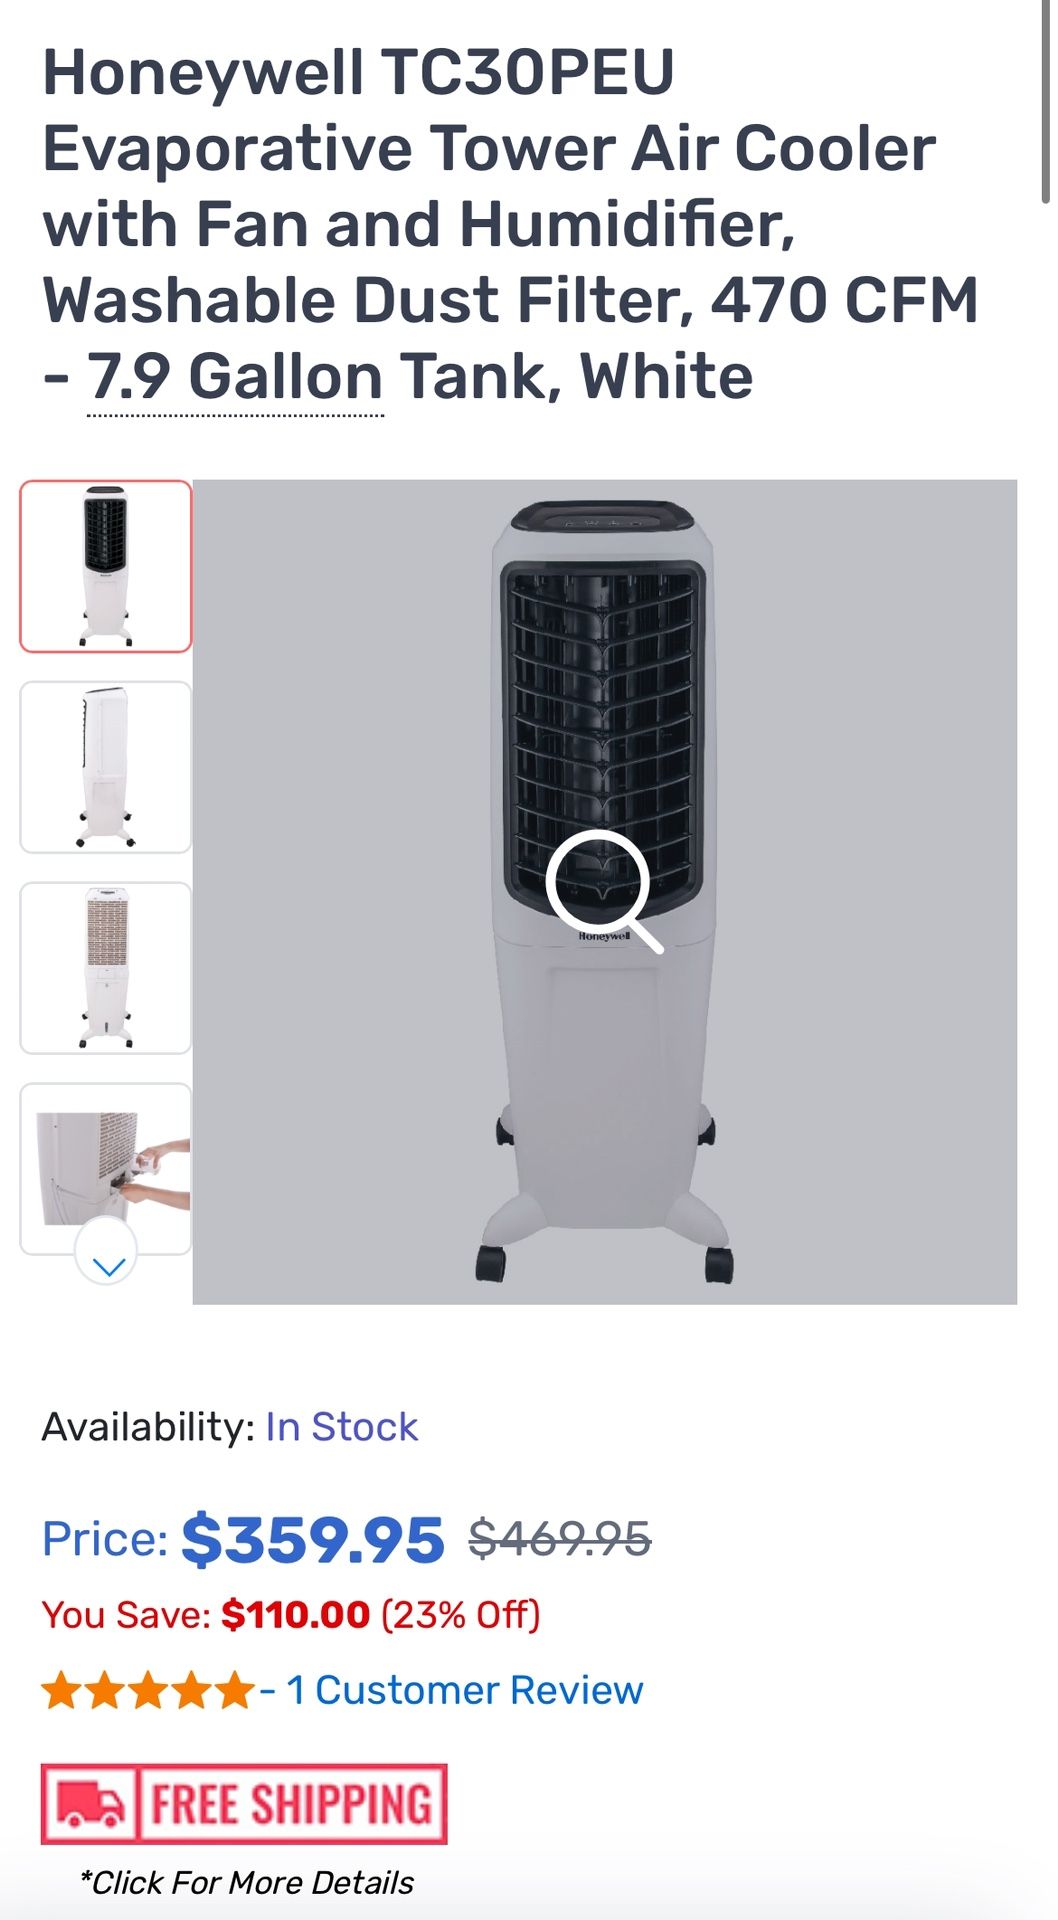 Honeywell TC30PEU Evaporative Tower Air Cooler with Fan and Humidifier, Washable Dust Filter, 470 CFM - 7.9 Gallon Tank, White